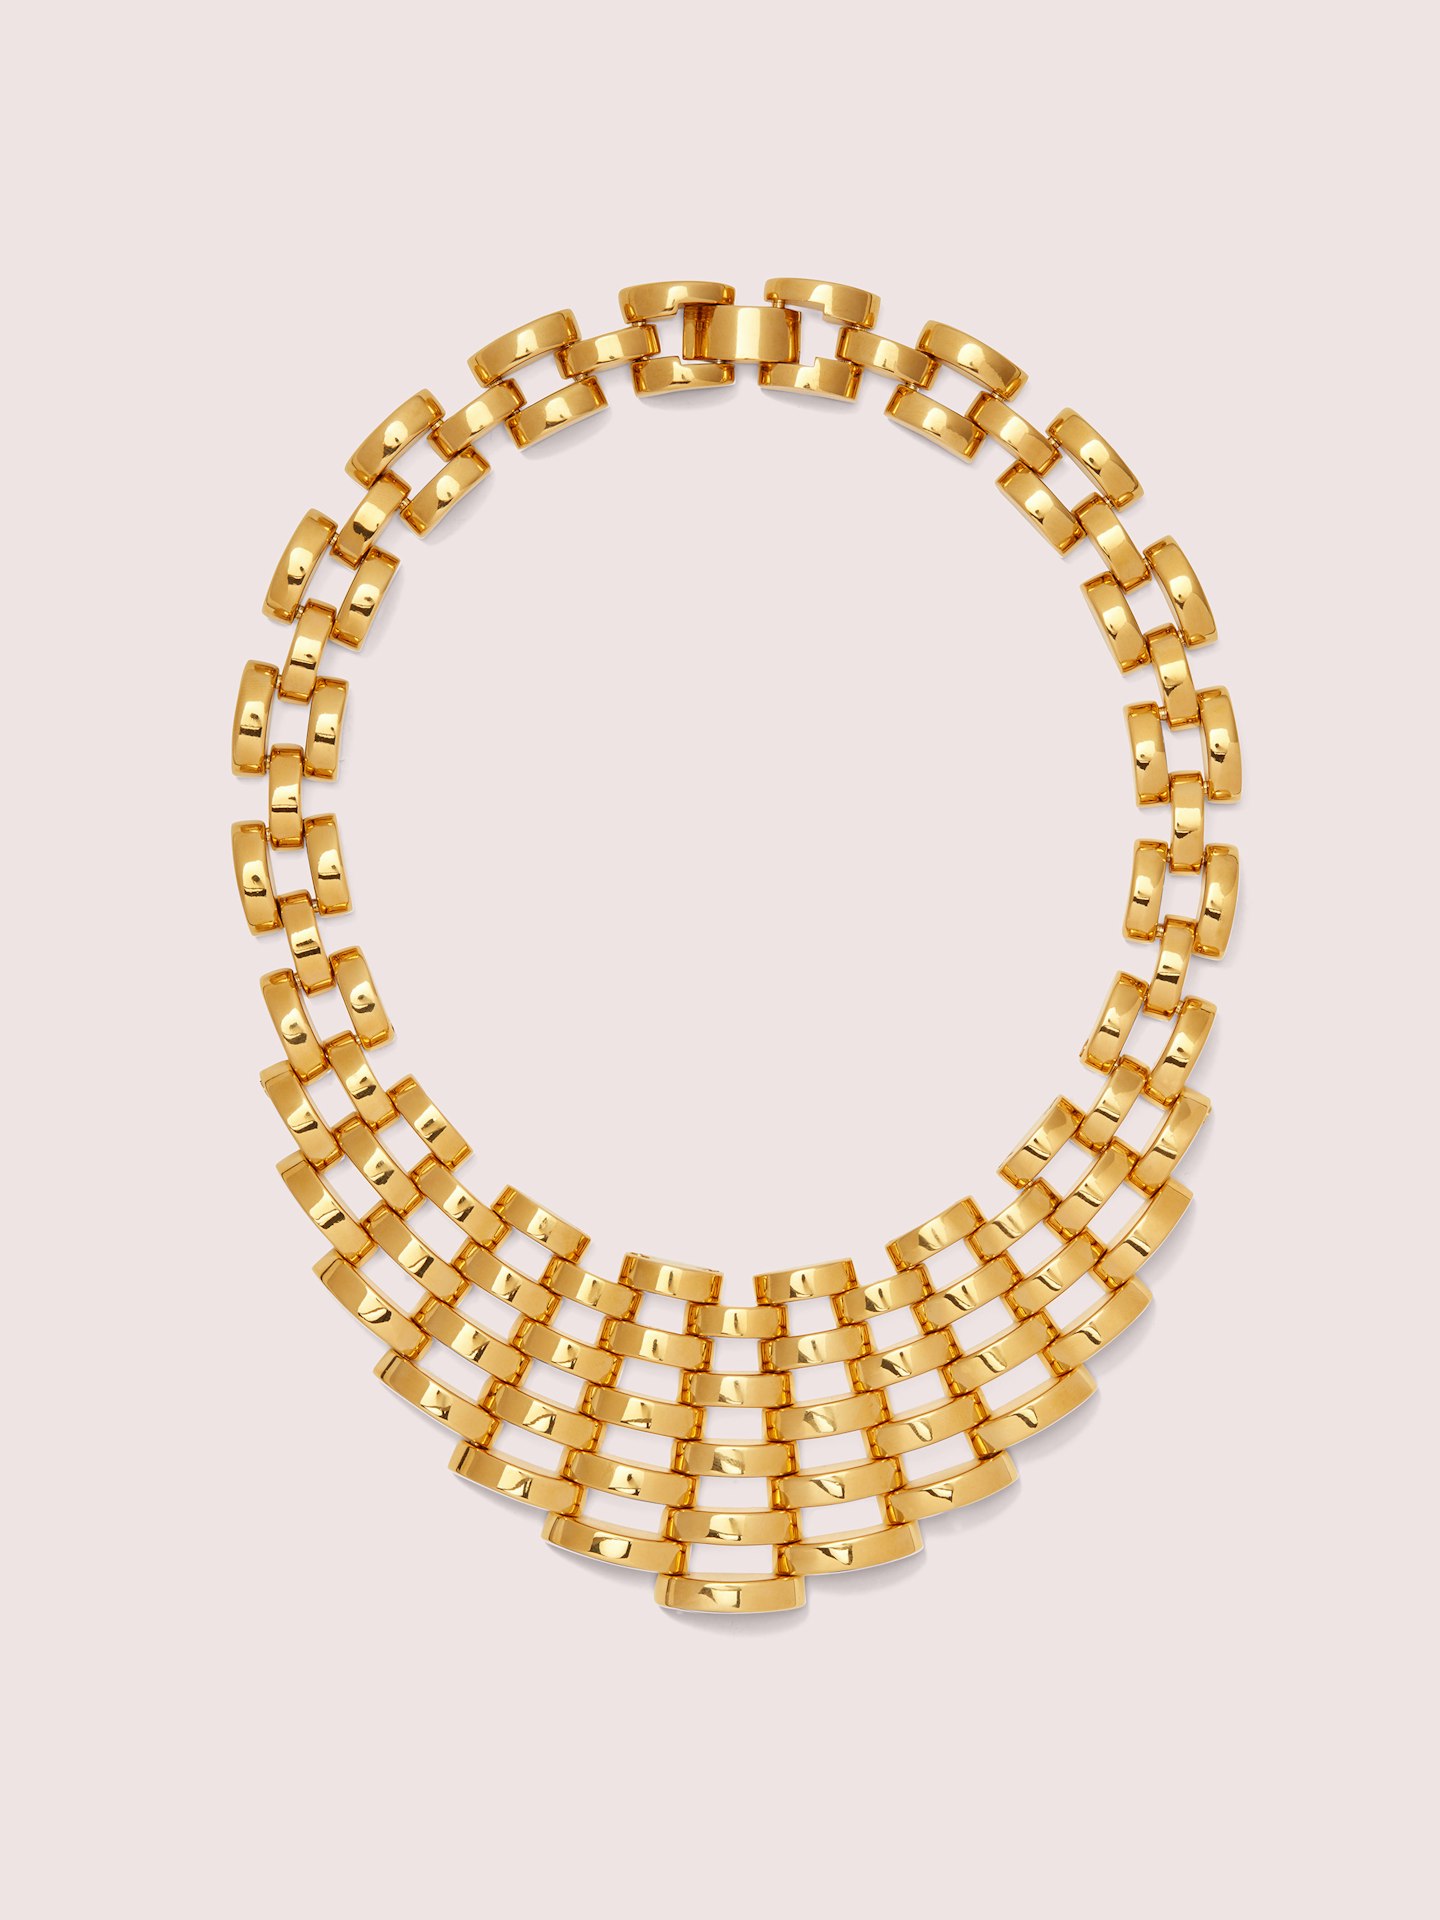 Kate Spade, Scallops Statement Necklace, £99